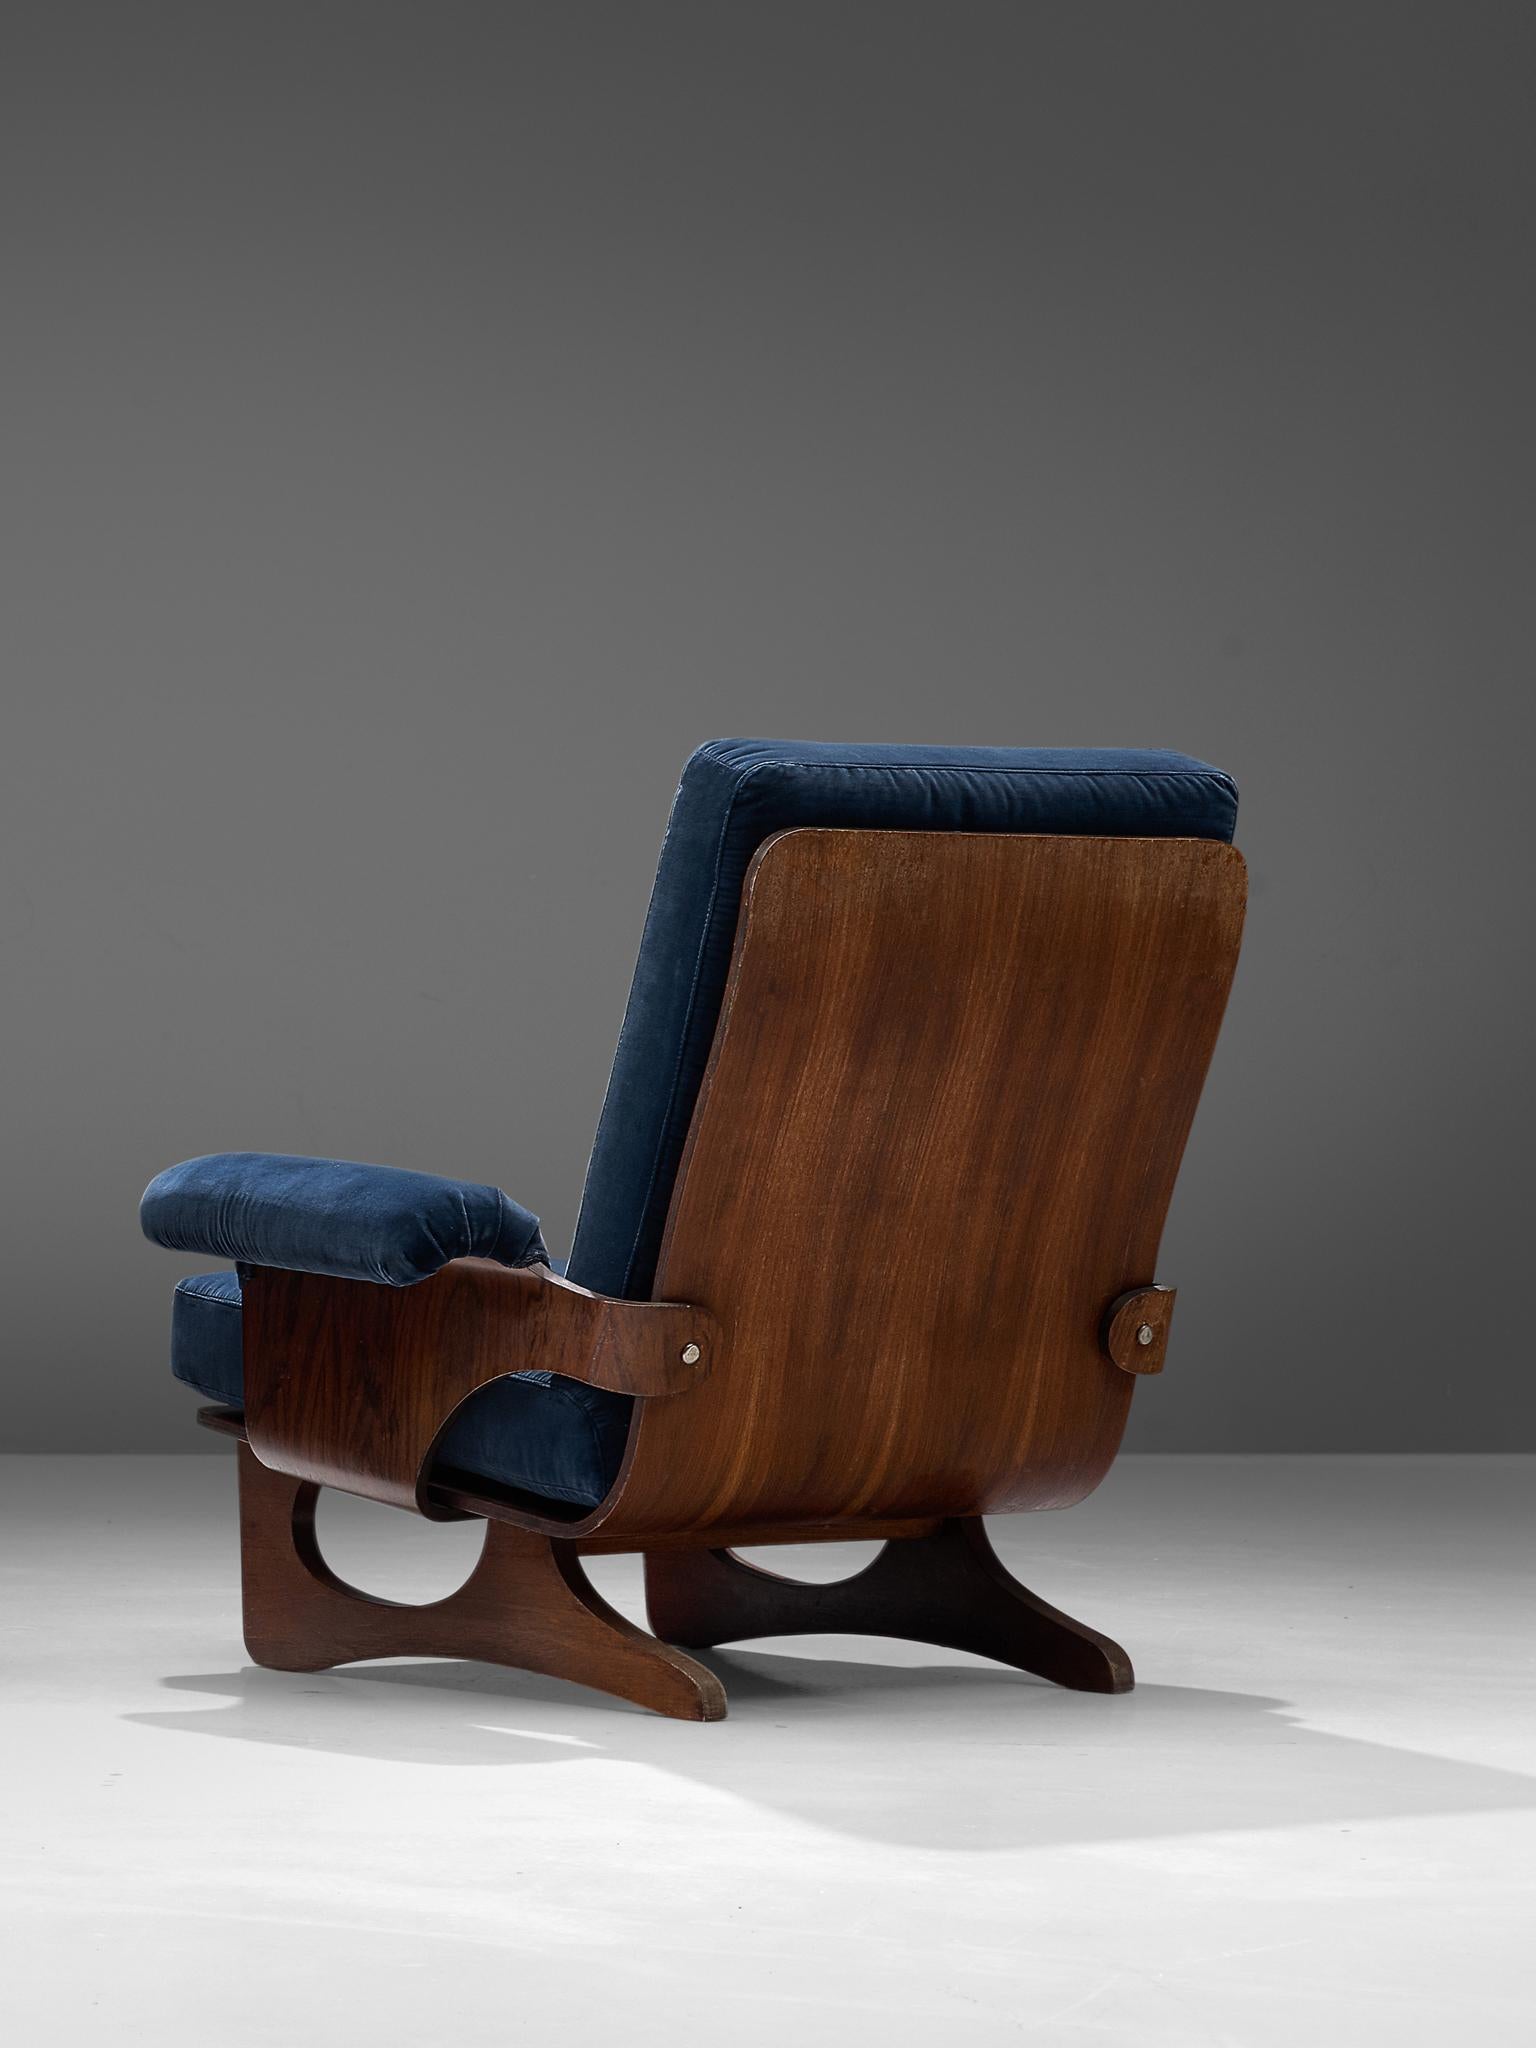 Silvio Cavatorta, lounge chair, blue velvet and teak, Italy, 1960s.

Armchair with beautiful bent teak frame and blue velvet upholstery. The seating and back are nicely curved to which the legs and armrests are attached. The armrests are finished